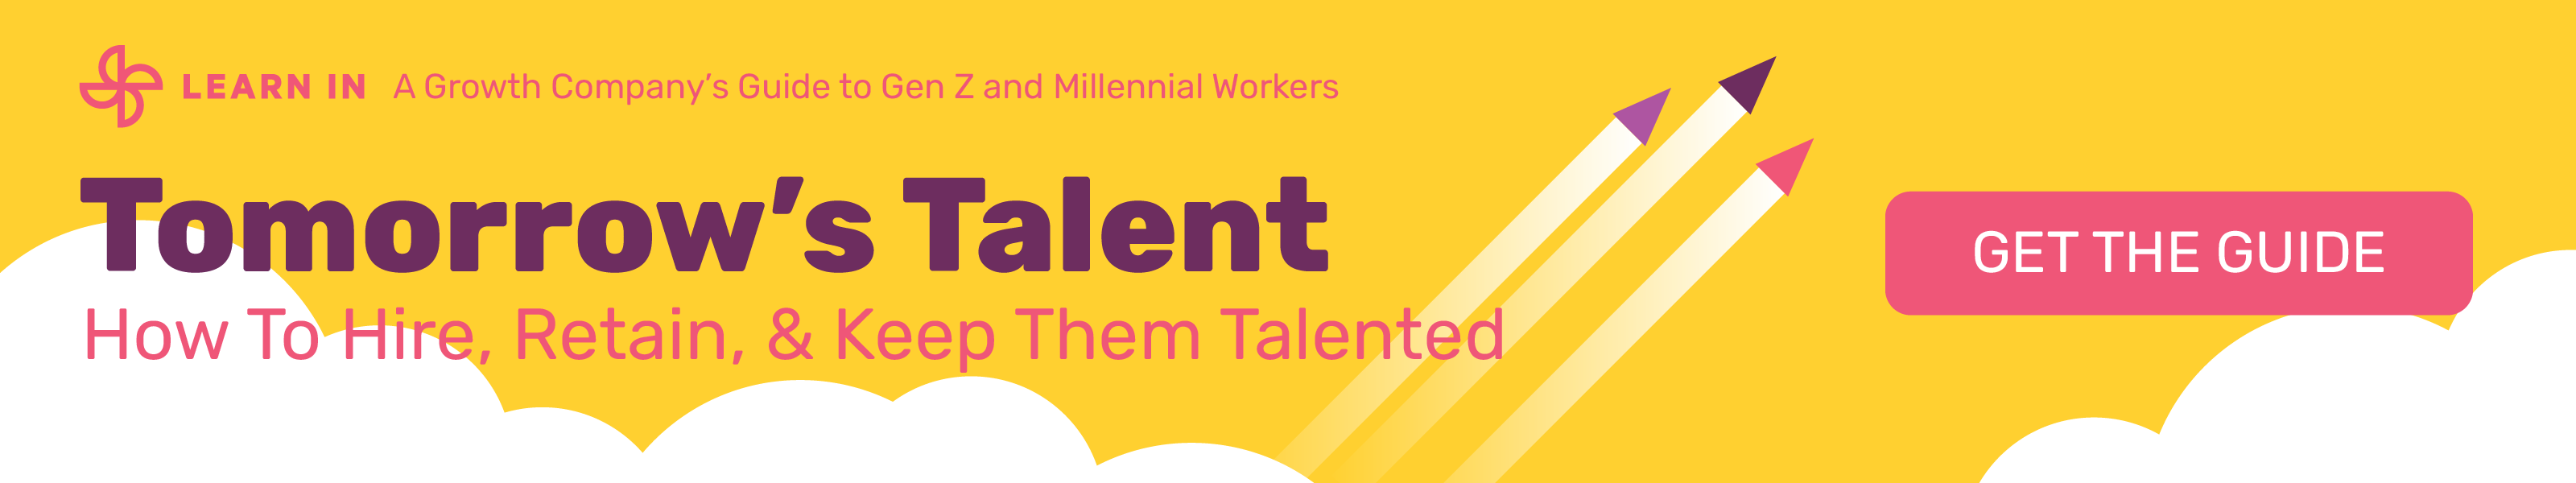 Tomorrow's Talent How To Hire, Retain, and Keep Them Talented Banner